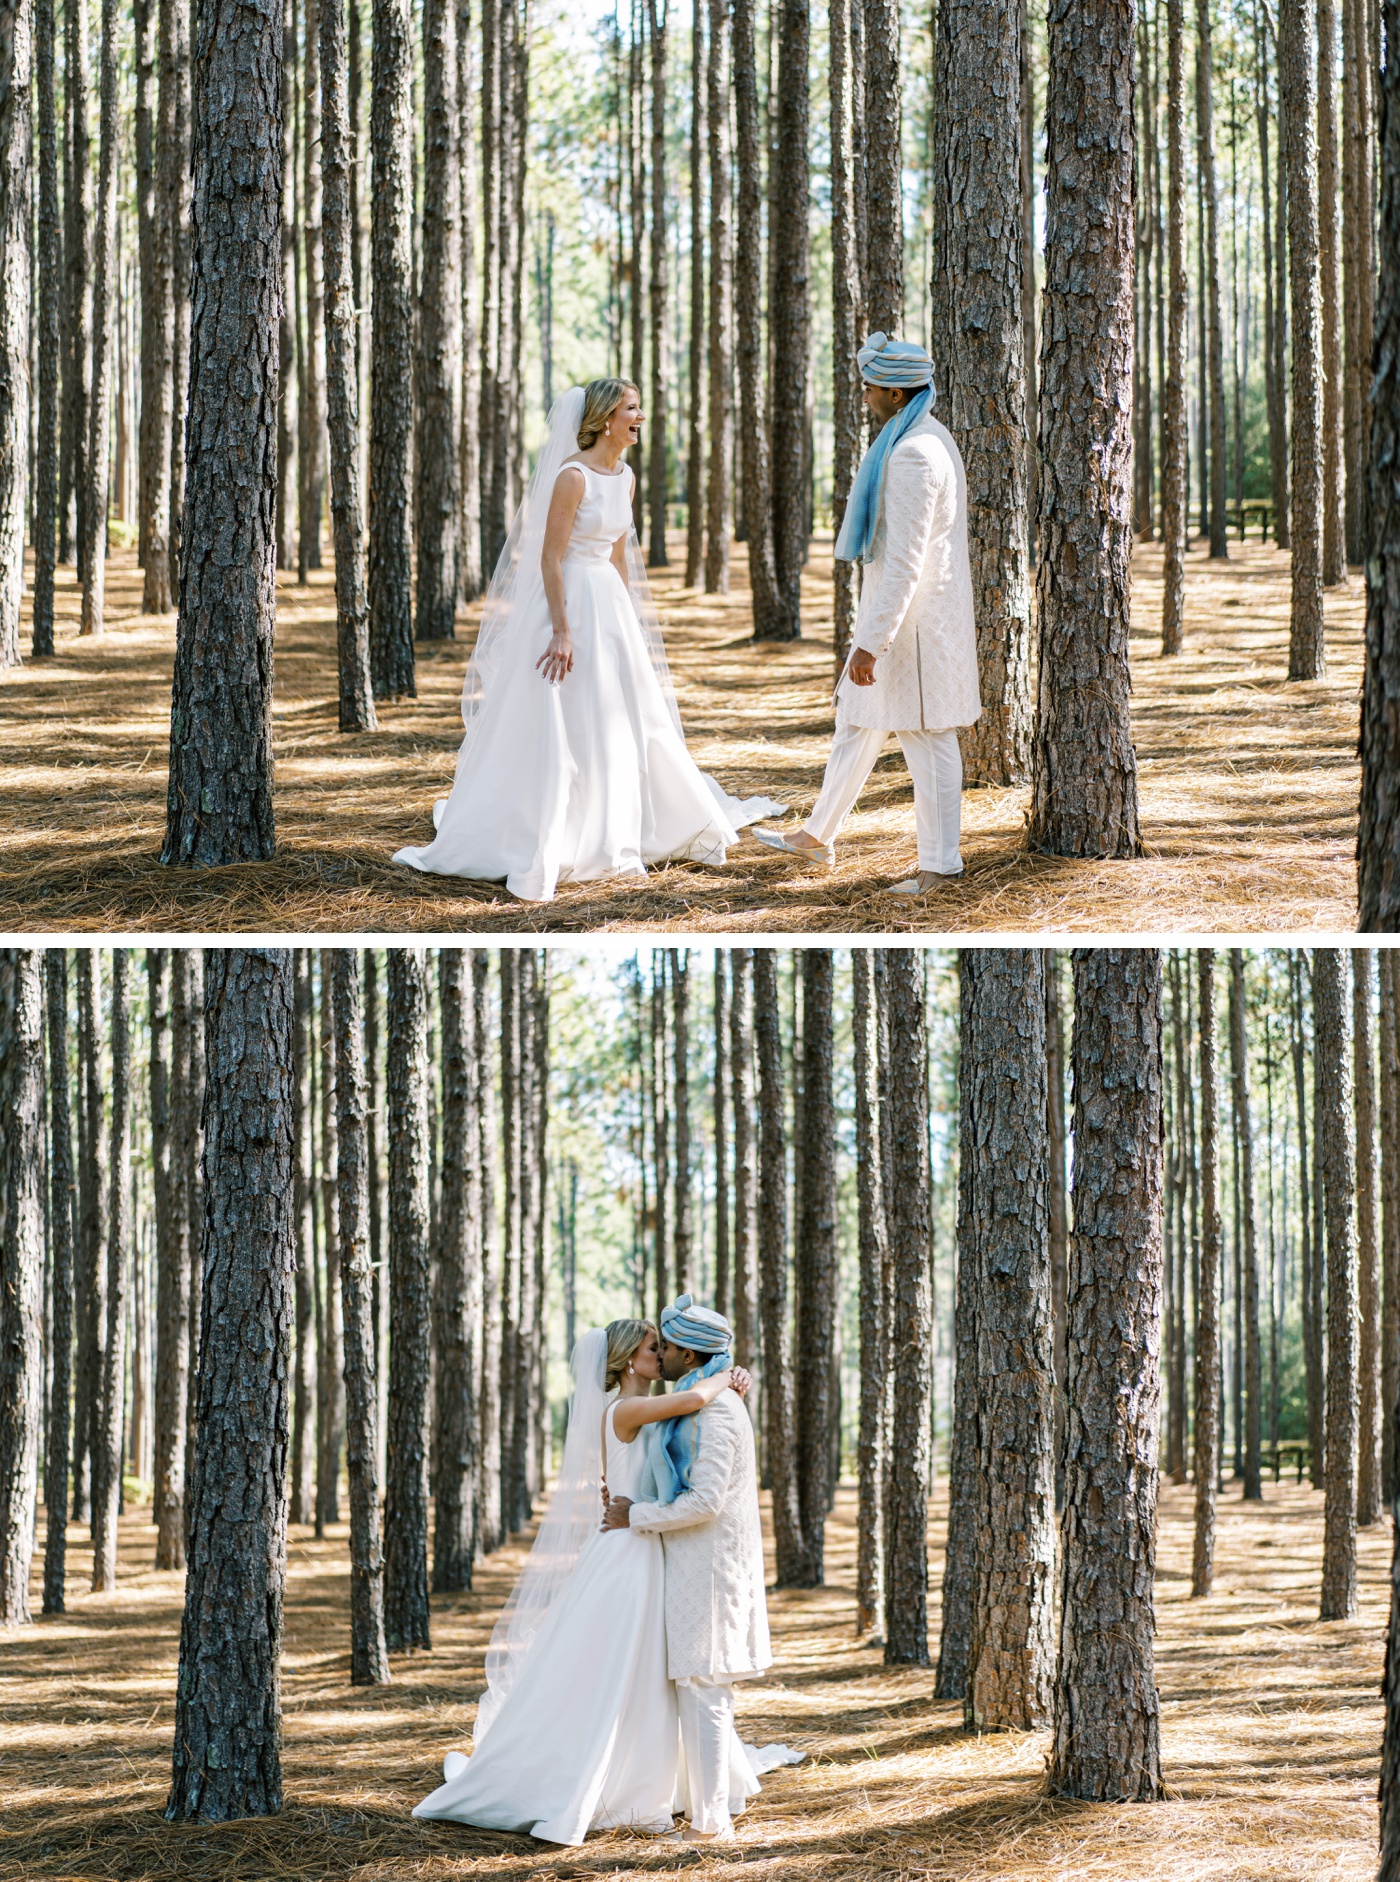 Bridal portraits at the bride's childhood home in Southern Pines, NC